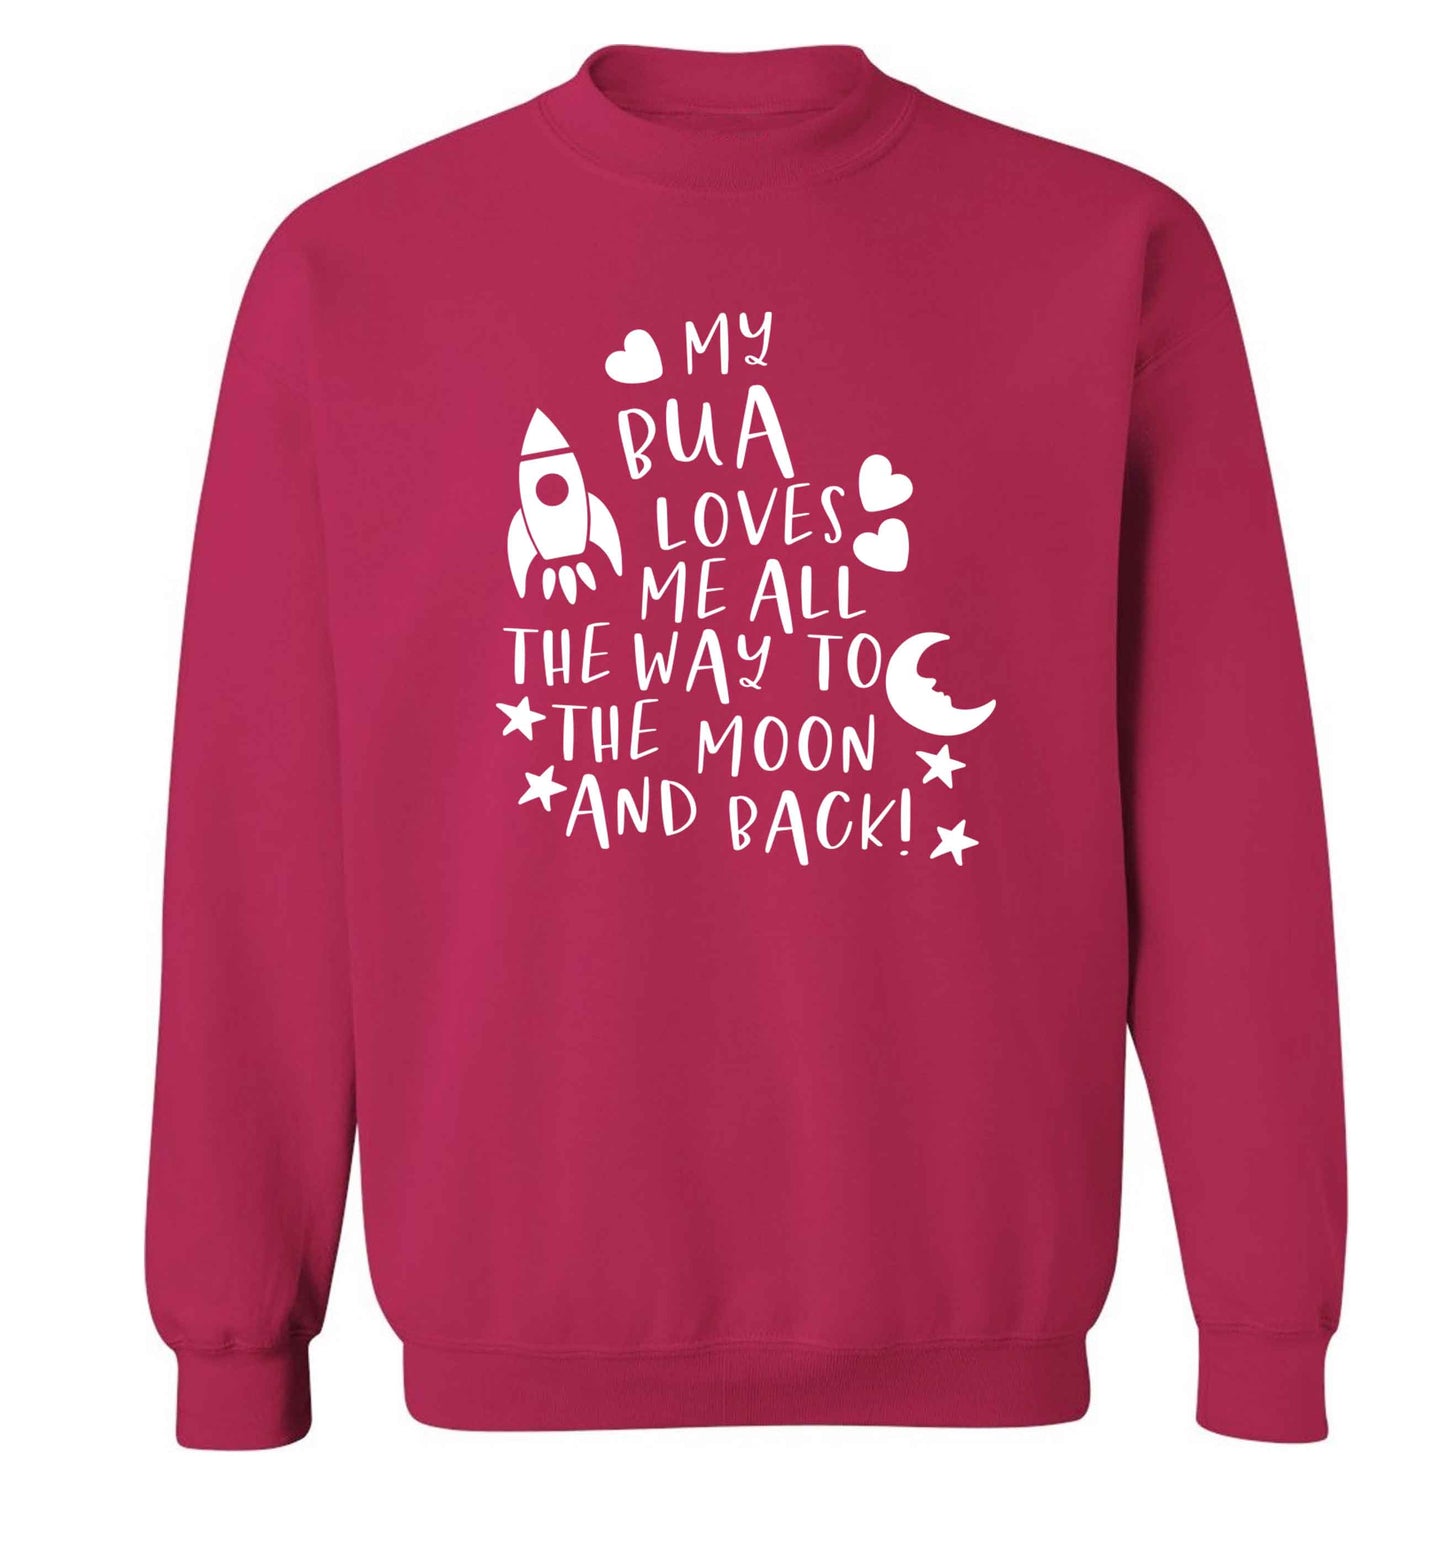 My bua loves me all they way to the moon and back Adult's unisex pink Sweater 2XL